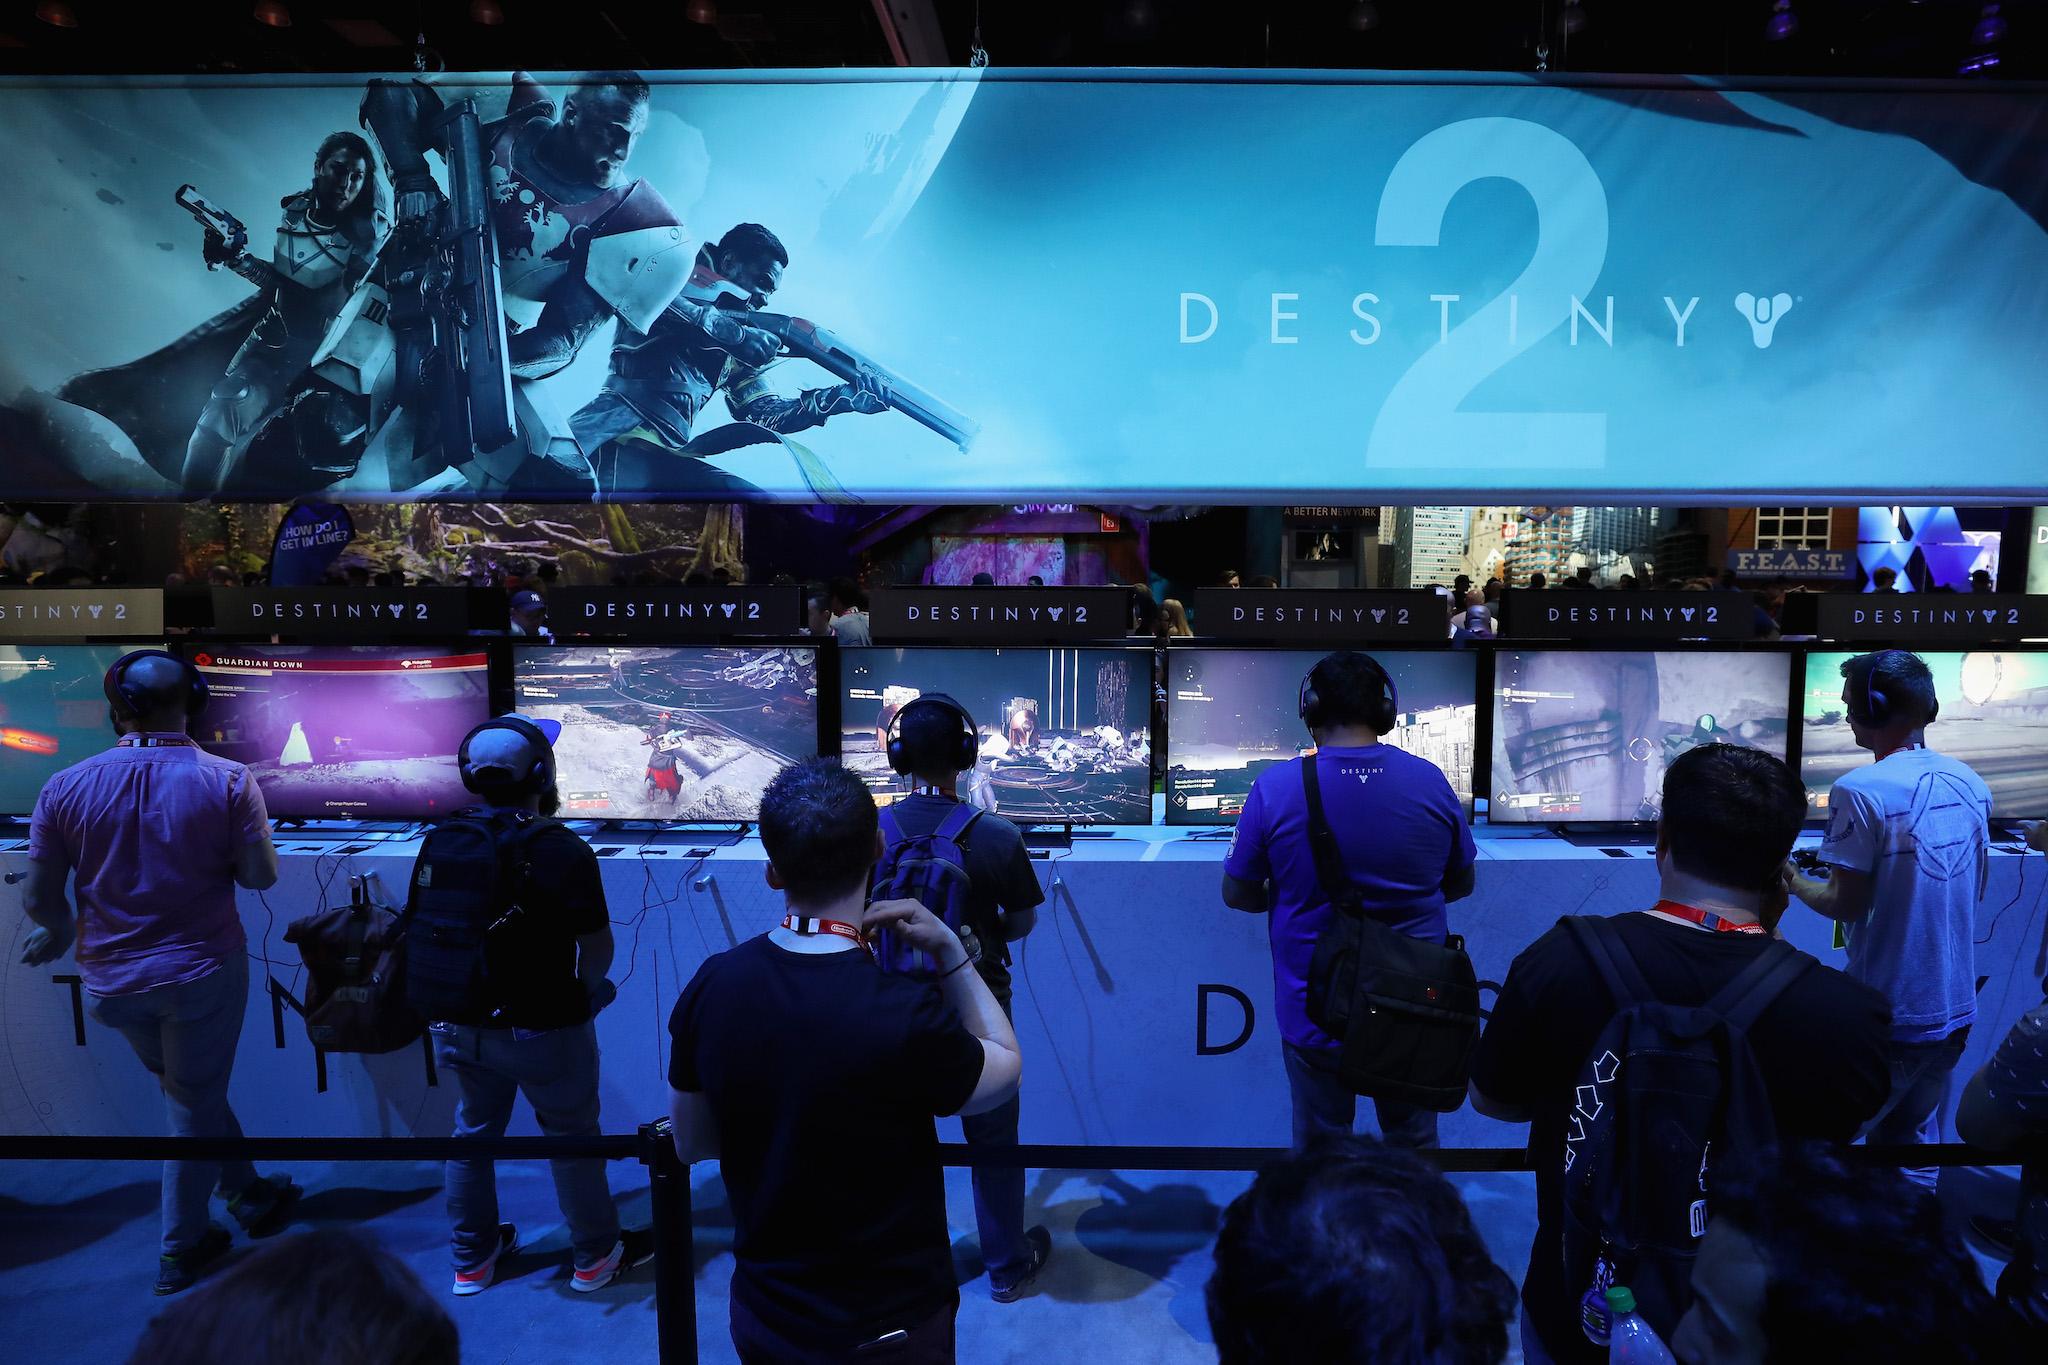 Gamers test 'Destiny 2' at the Sony PlayStation exhibit during the Electronic Entertainment Expo E3 at the Los Angeles Convention Center on June 13, 2017